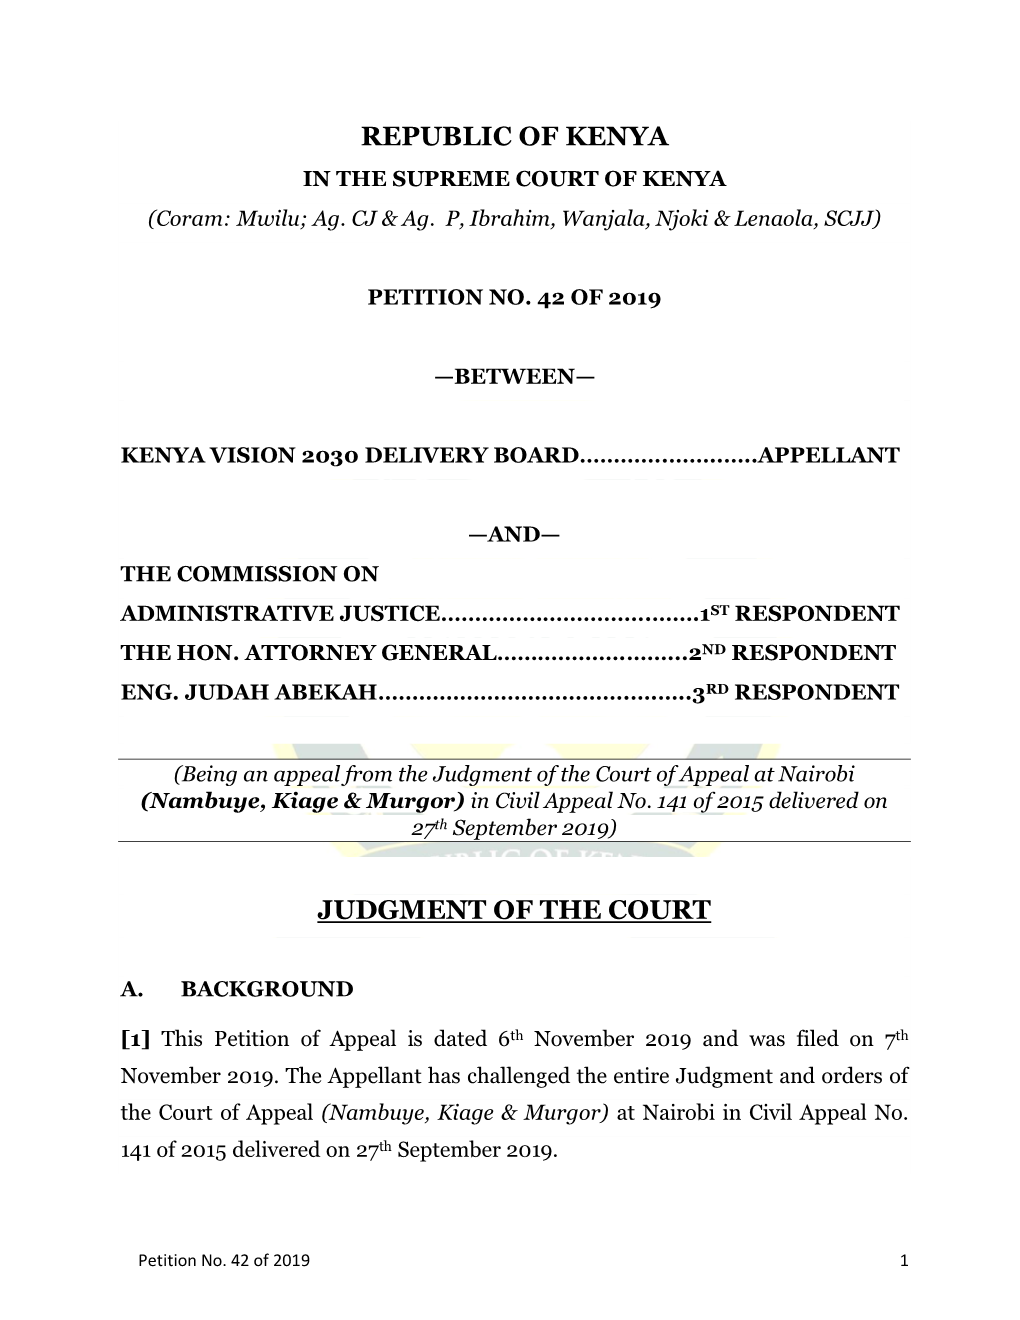 Republic of Kenya Judgment of the Court